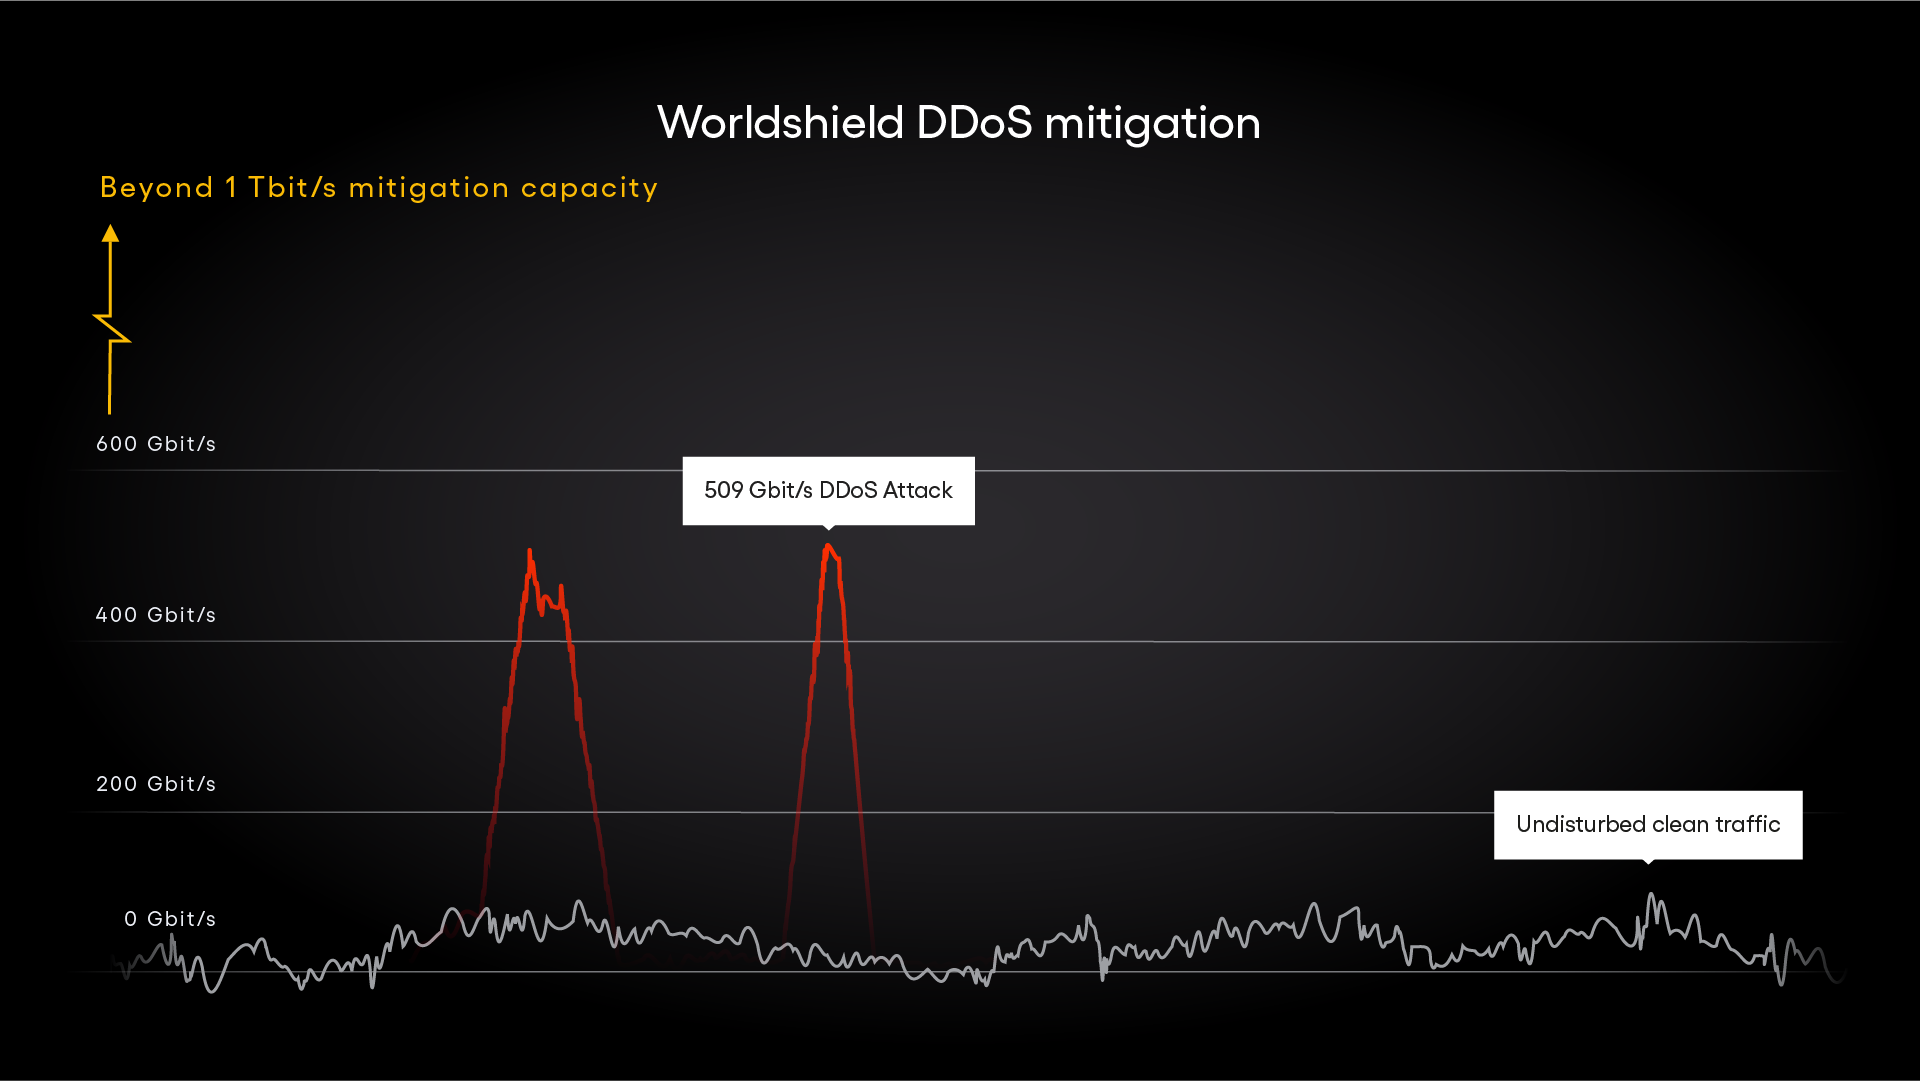 Mitigation graphic where a DDoS attack of 509 Gbit/s is mitigated while clean traffic keeps flowing.